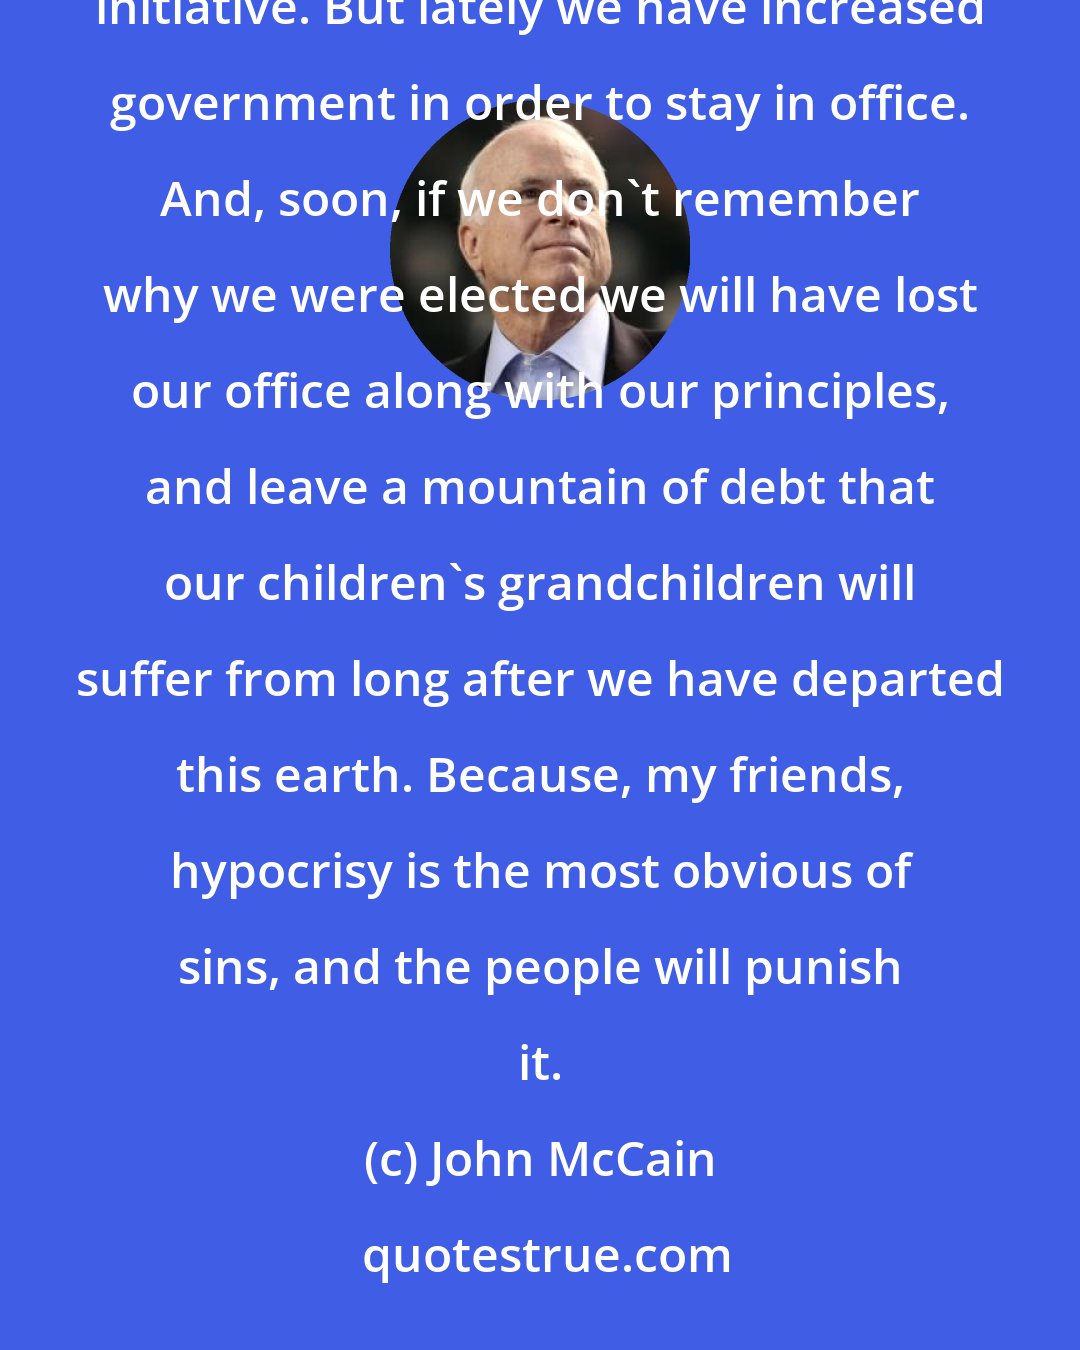 John McCain: Conservatives came to office to reduce the size of government and enlarge the sphere of free and private initiative. But lately we have increased government in order to stay in office. And, soon, if we don't remember why we were elected we will have lost our office along with our principles, and leave a mountain of debt that our children's grandchildren will suffer from long after we have departed this earth. Because, my friends, hypocrisy is the most obvious of sins, and the people will punish it.